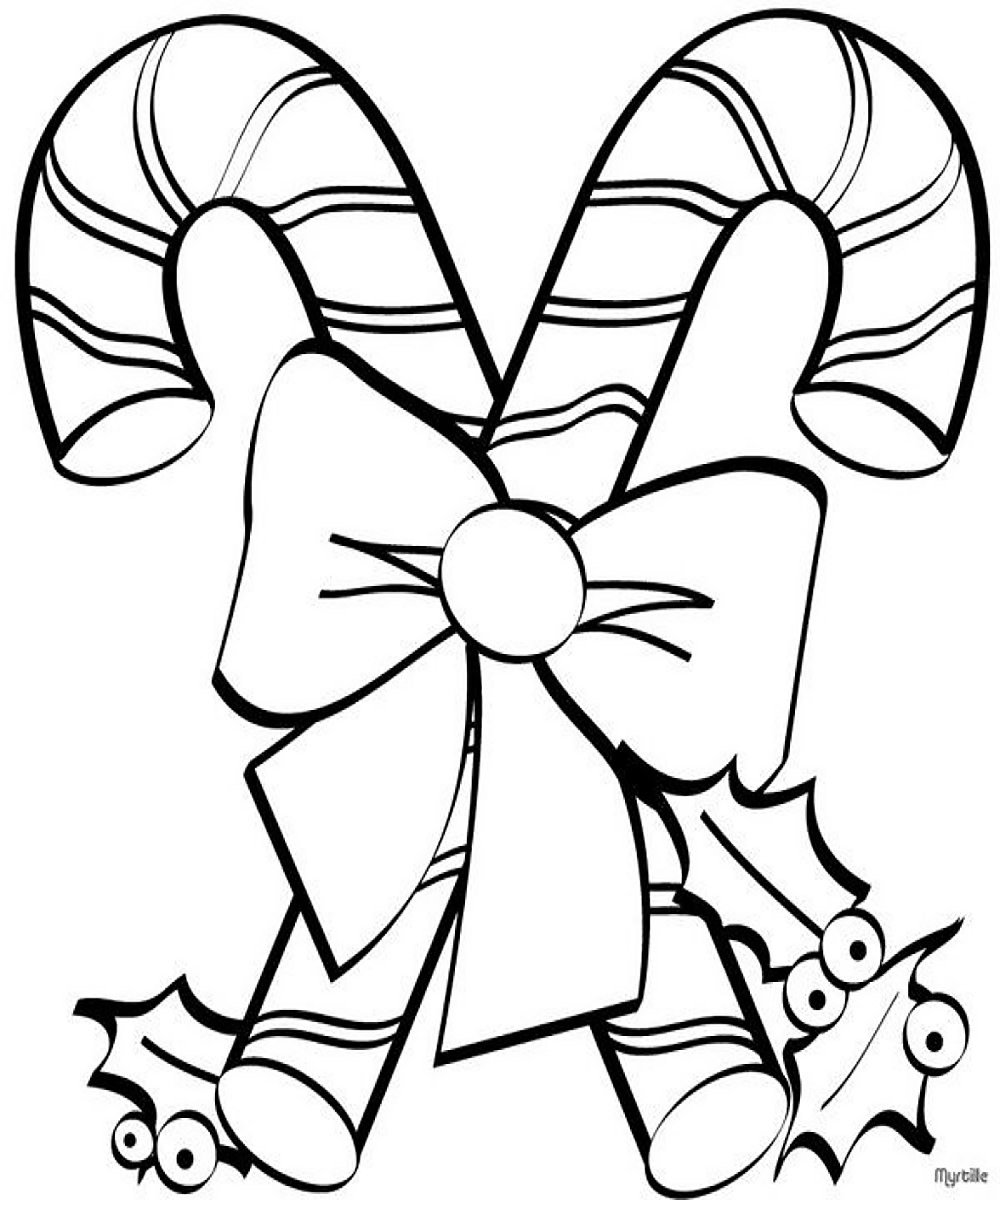 21+ St. John The Baptist Coloring Page : Free Coloring Pages